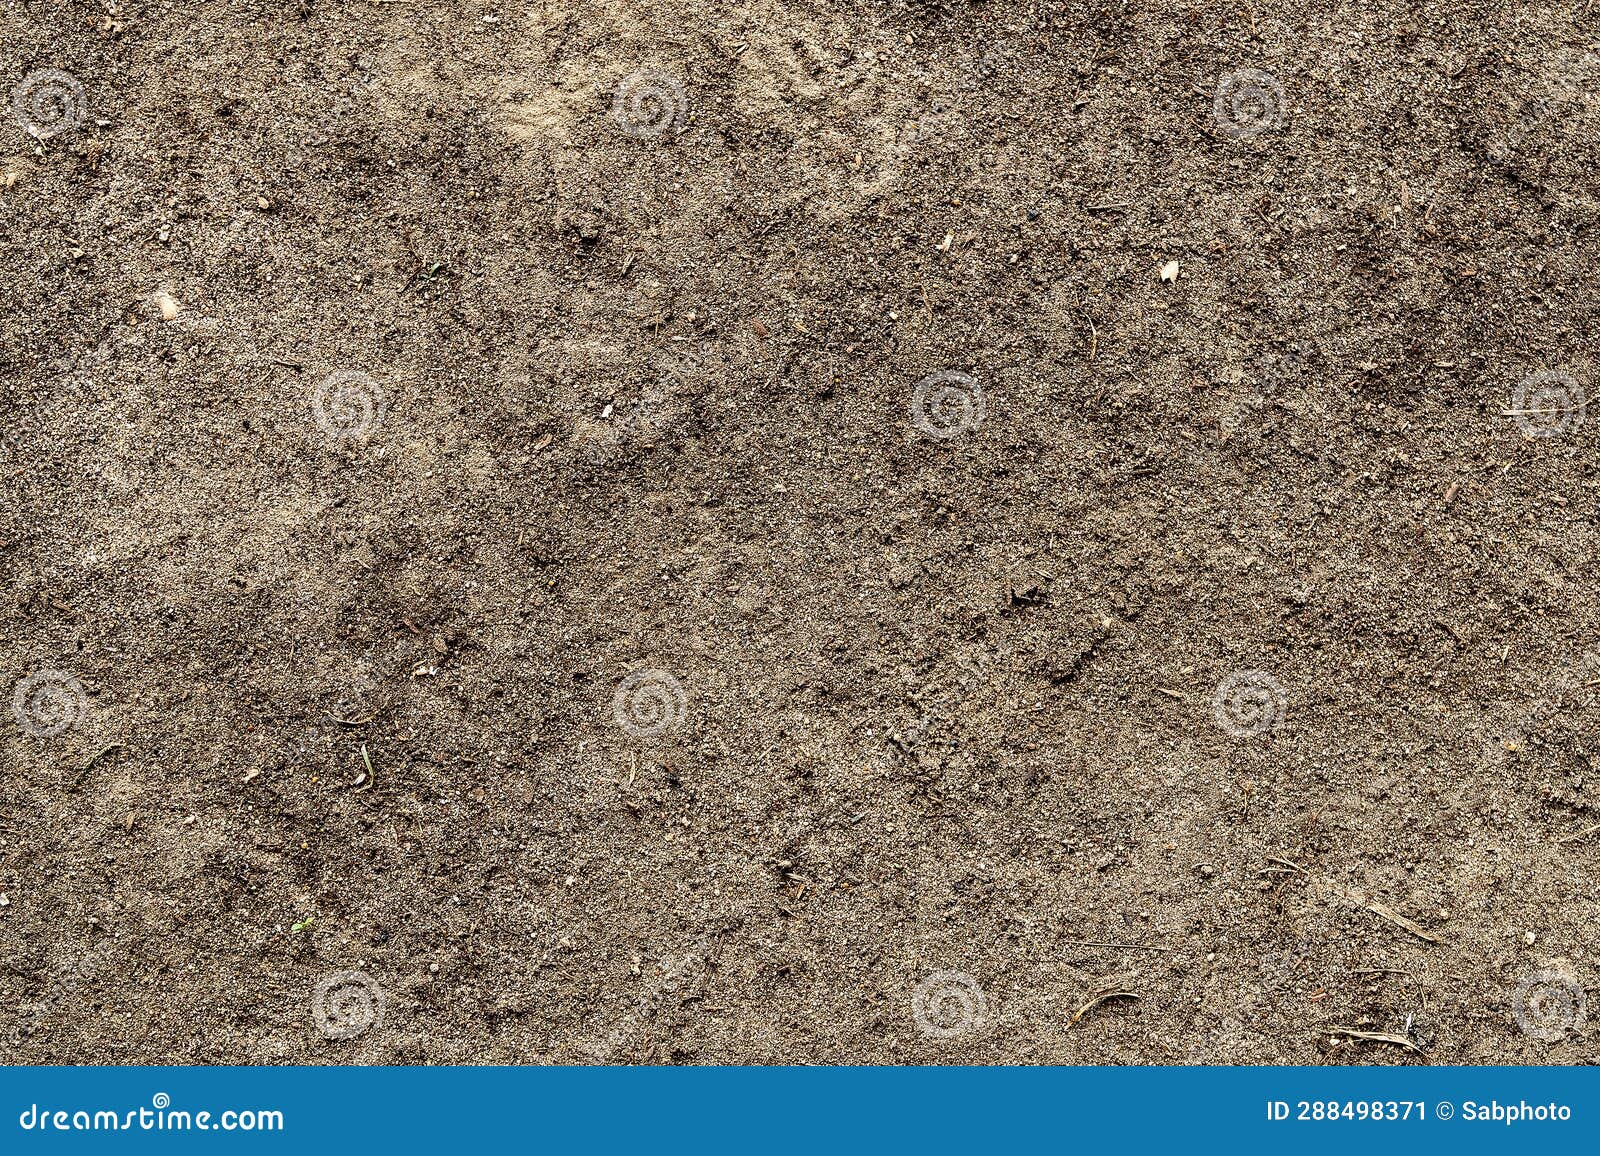 Natural Ground Texture stock image. Image of nature - 288498371